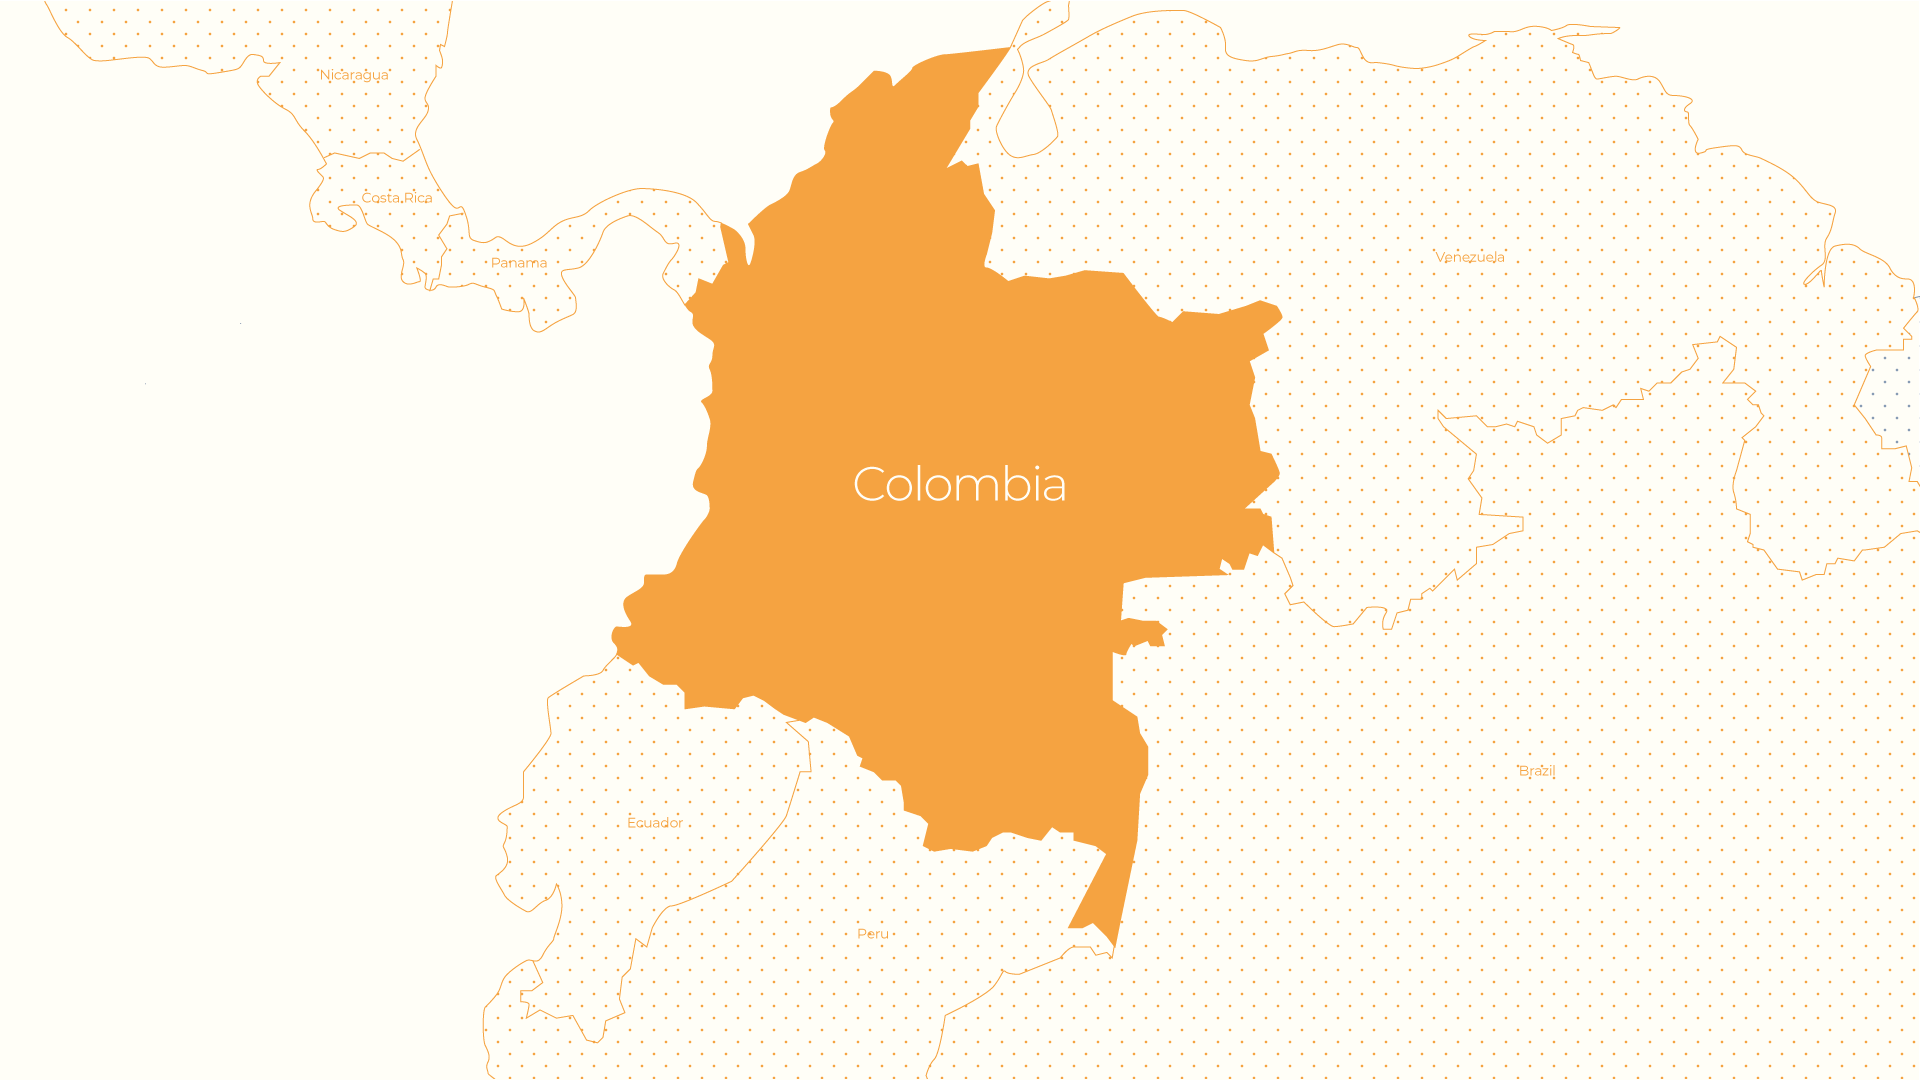 Colombia filter map